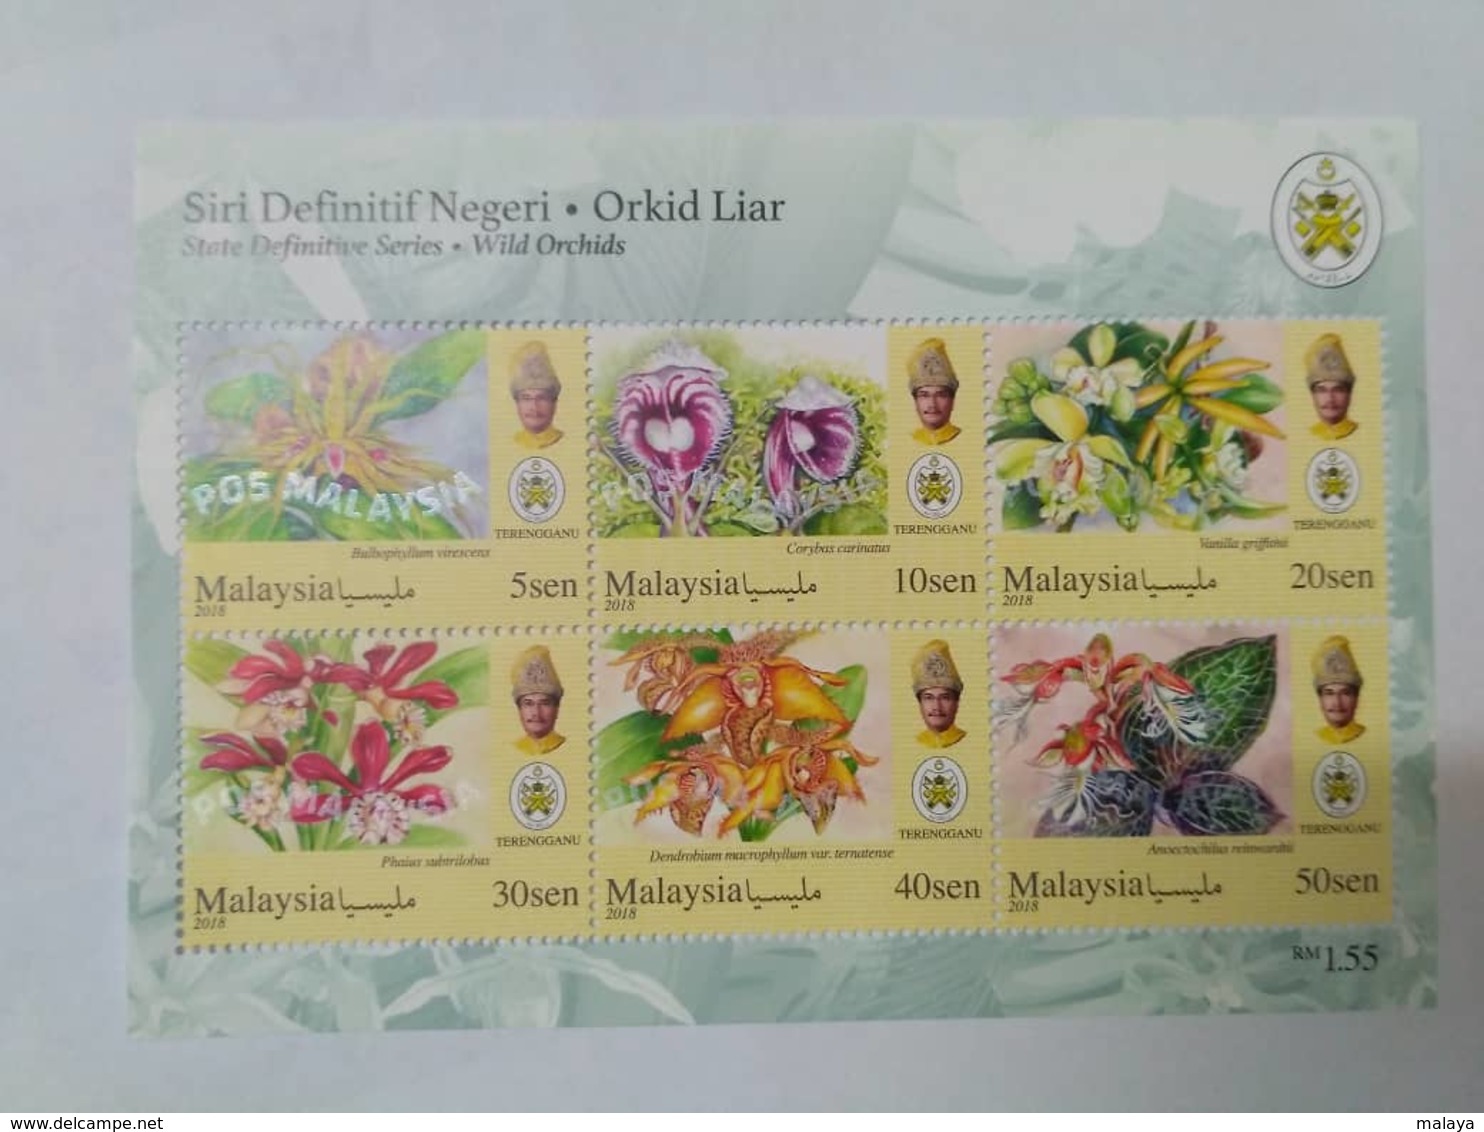 MALAYSIA 2018 WILD ORCHIDS definitive state series 14 MS stamps Perf Complete Sarawak Borneo Sabah Penang Perlis